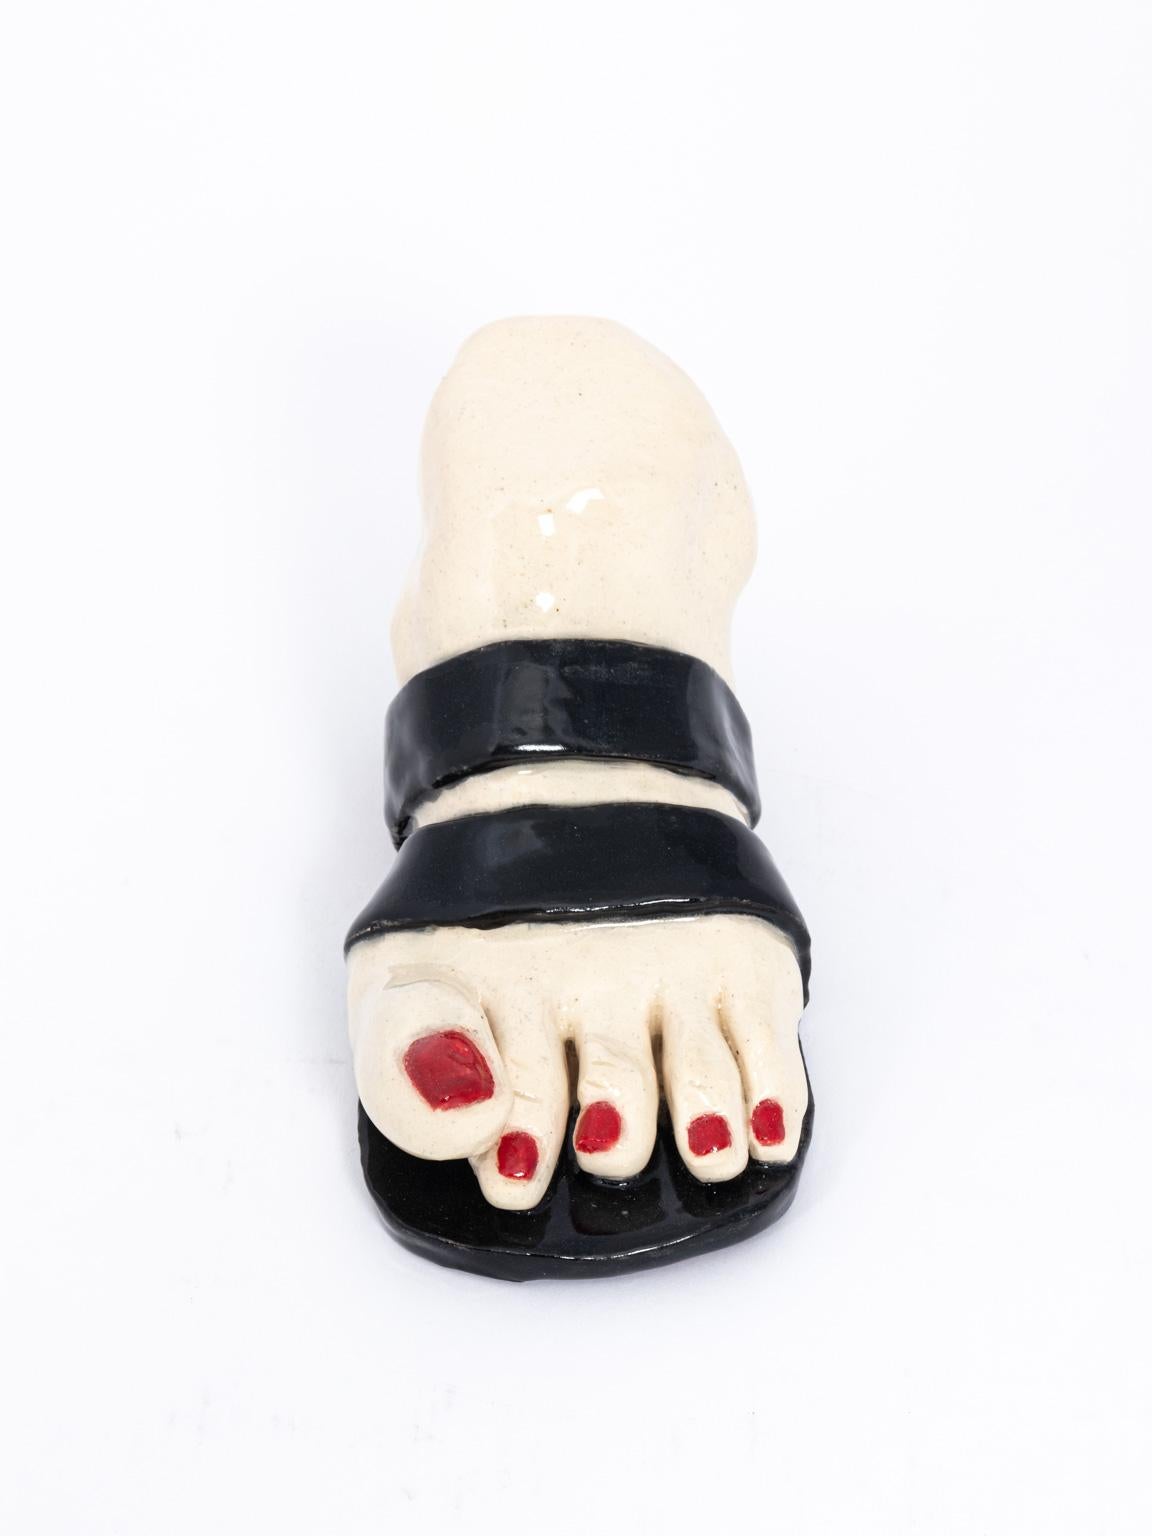 Contemporary Handmade Ceramic Foot In Good Condition For Sale In Stamford, CT